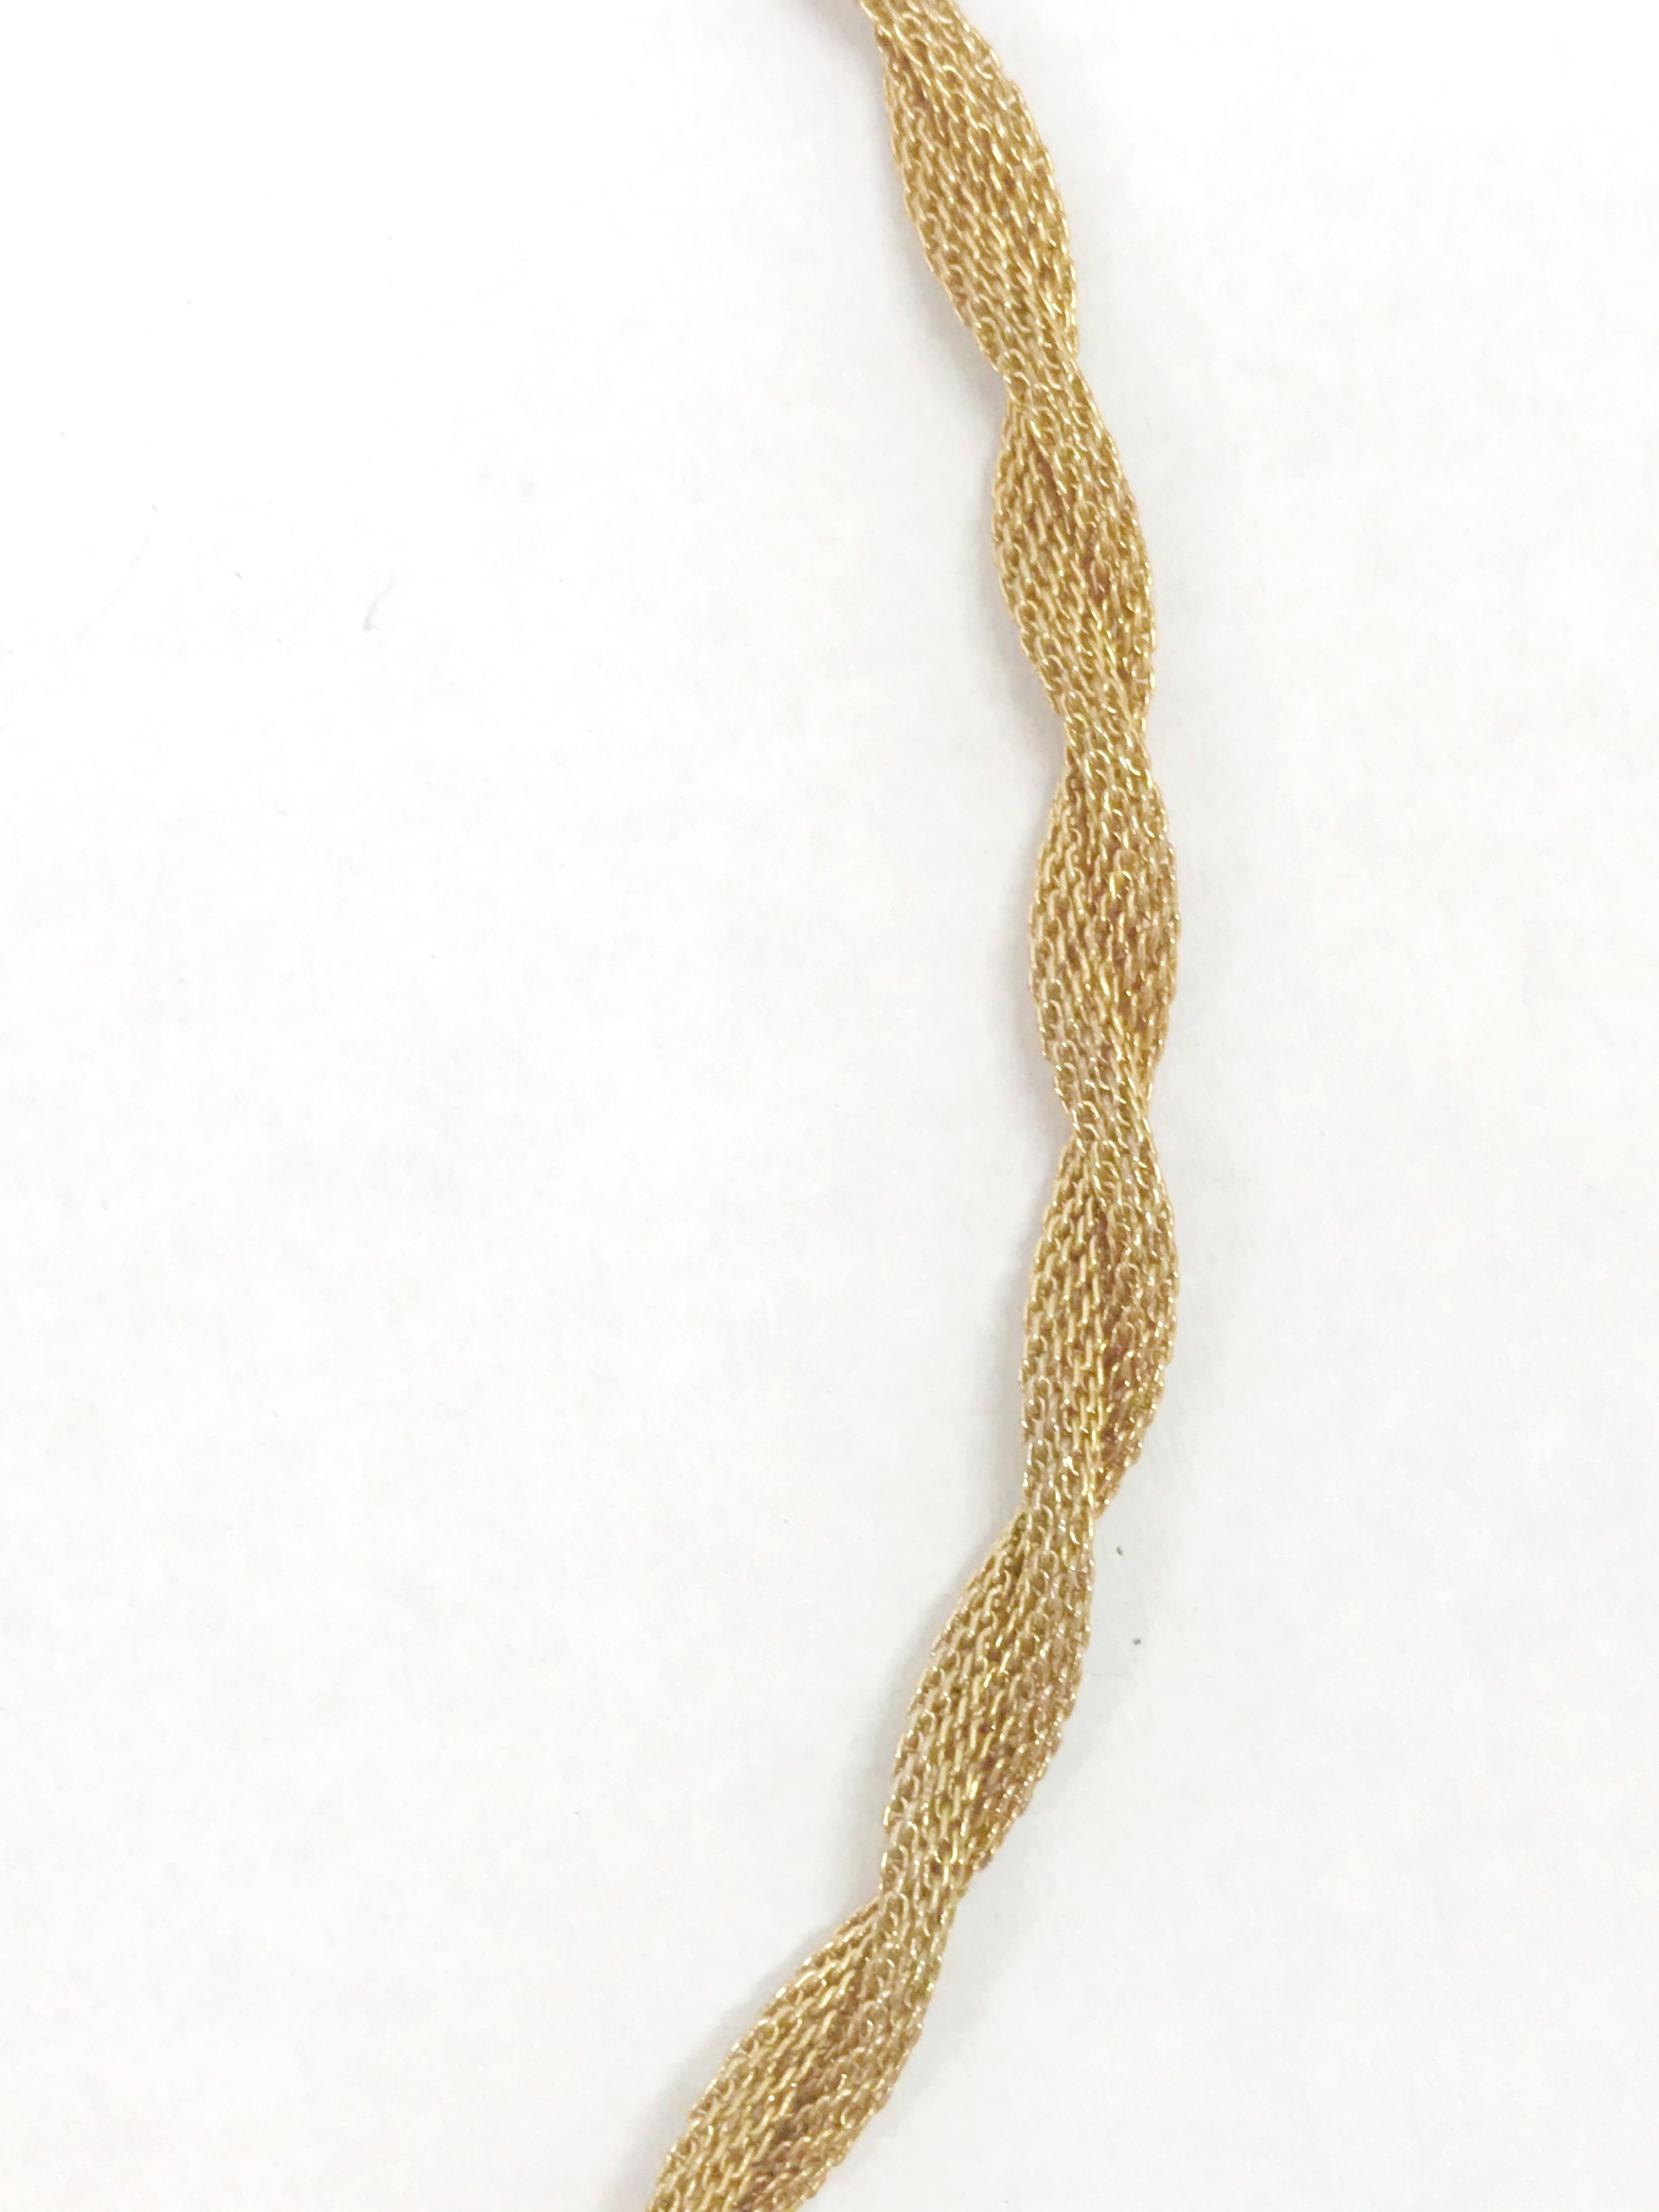 Sarah Coventry 1976 Golden Braids Mesh Necklace - Hers and His Treasures